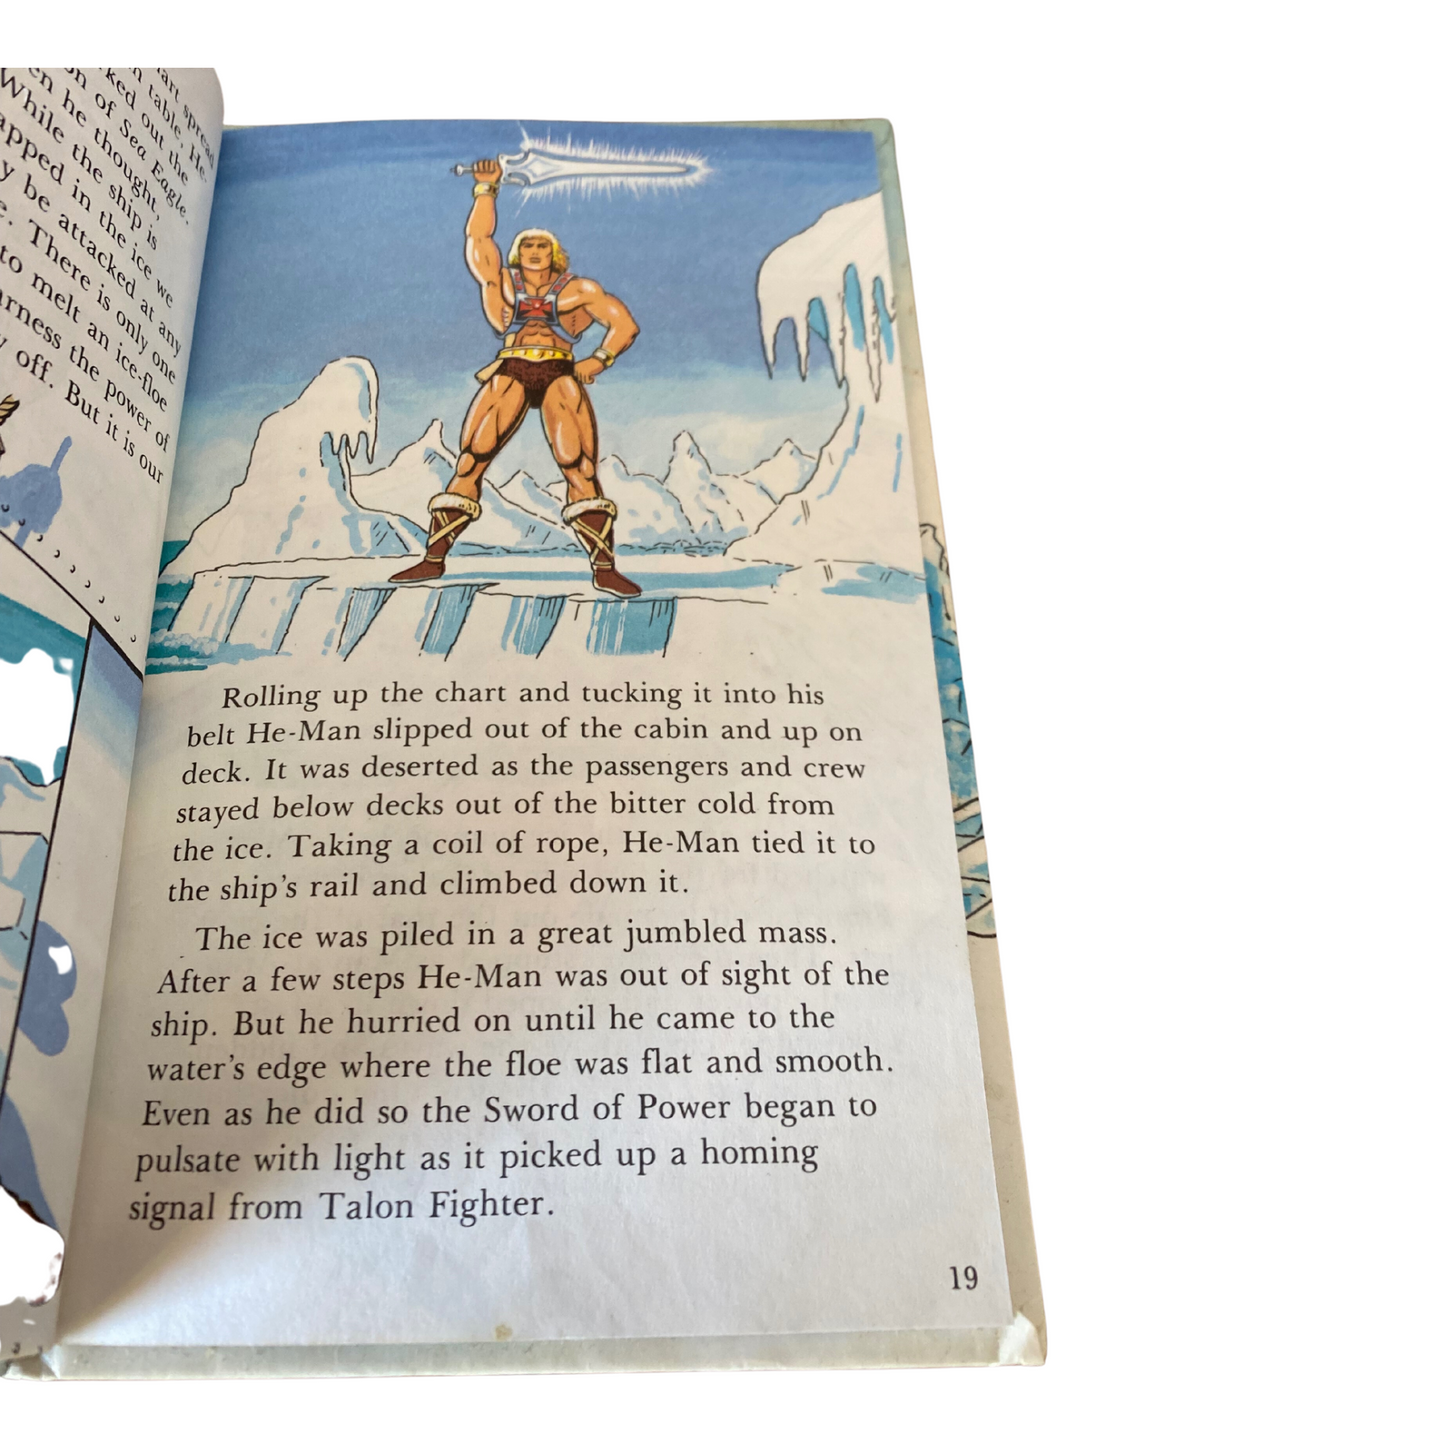 He-Man story book printed in England by John Grant